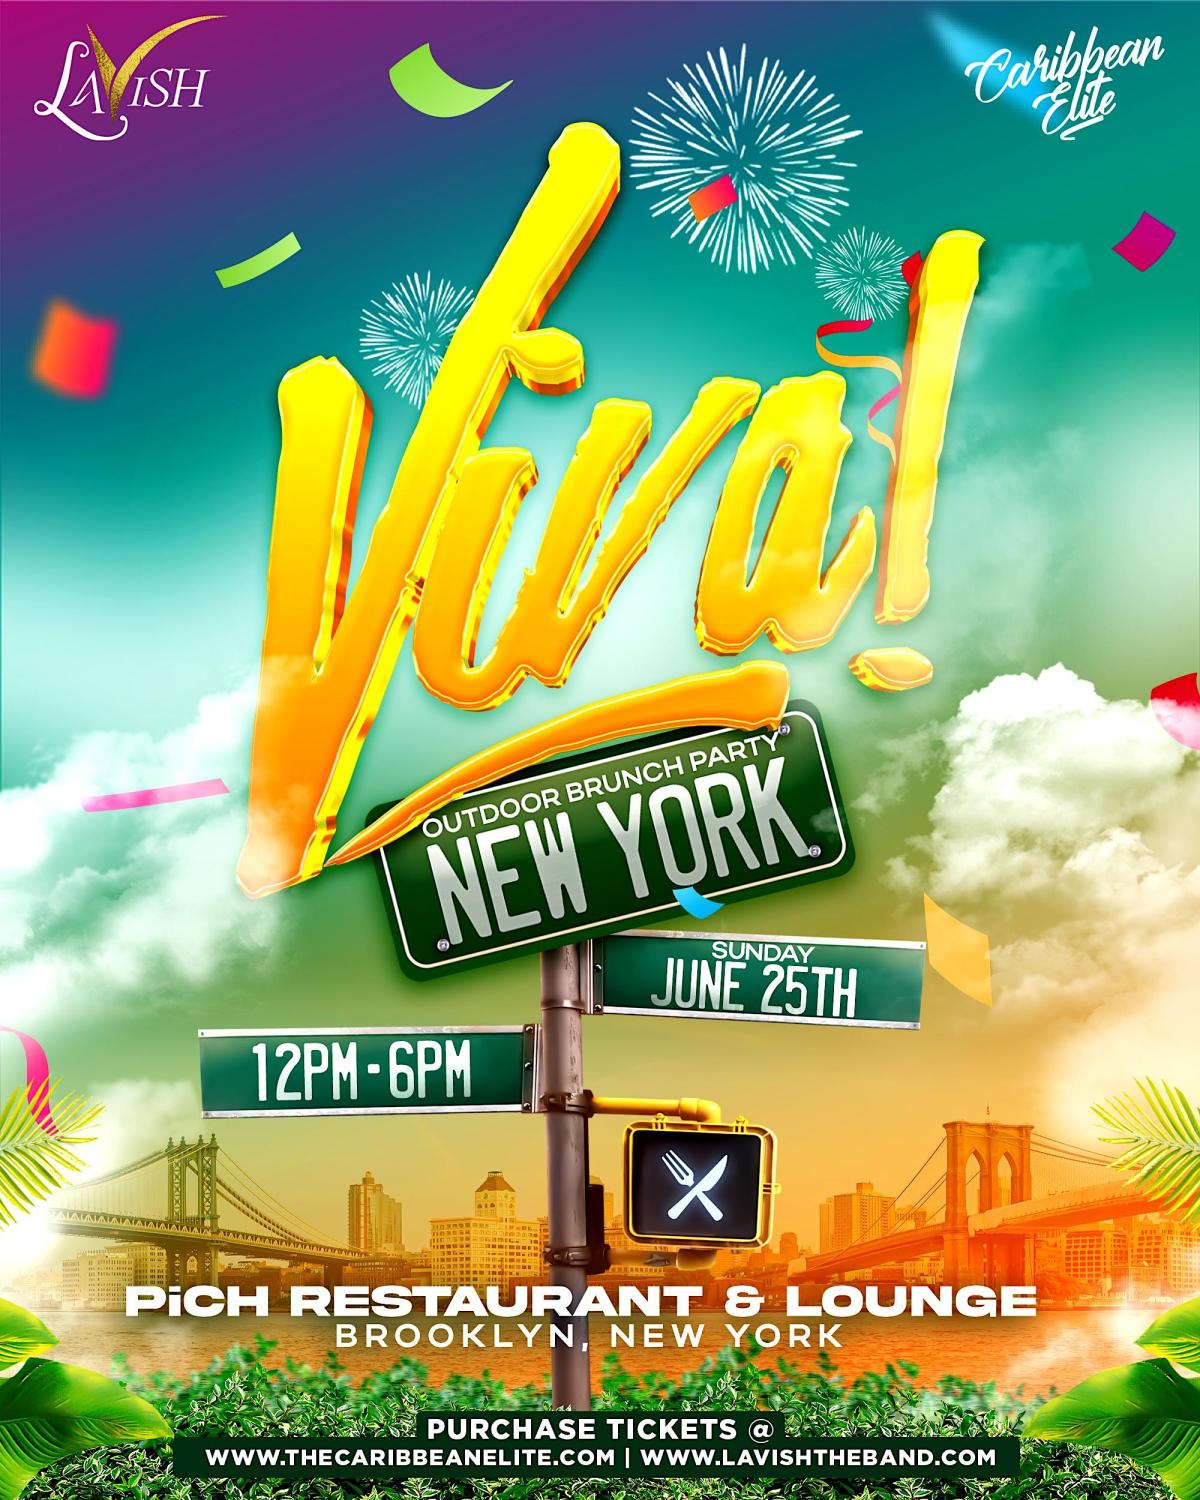 Viva! Brunch Party: New York flyer or graphic.